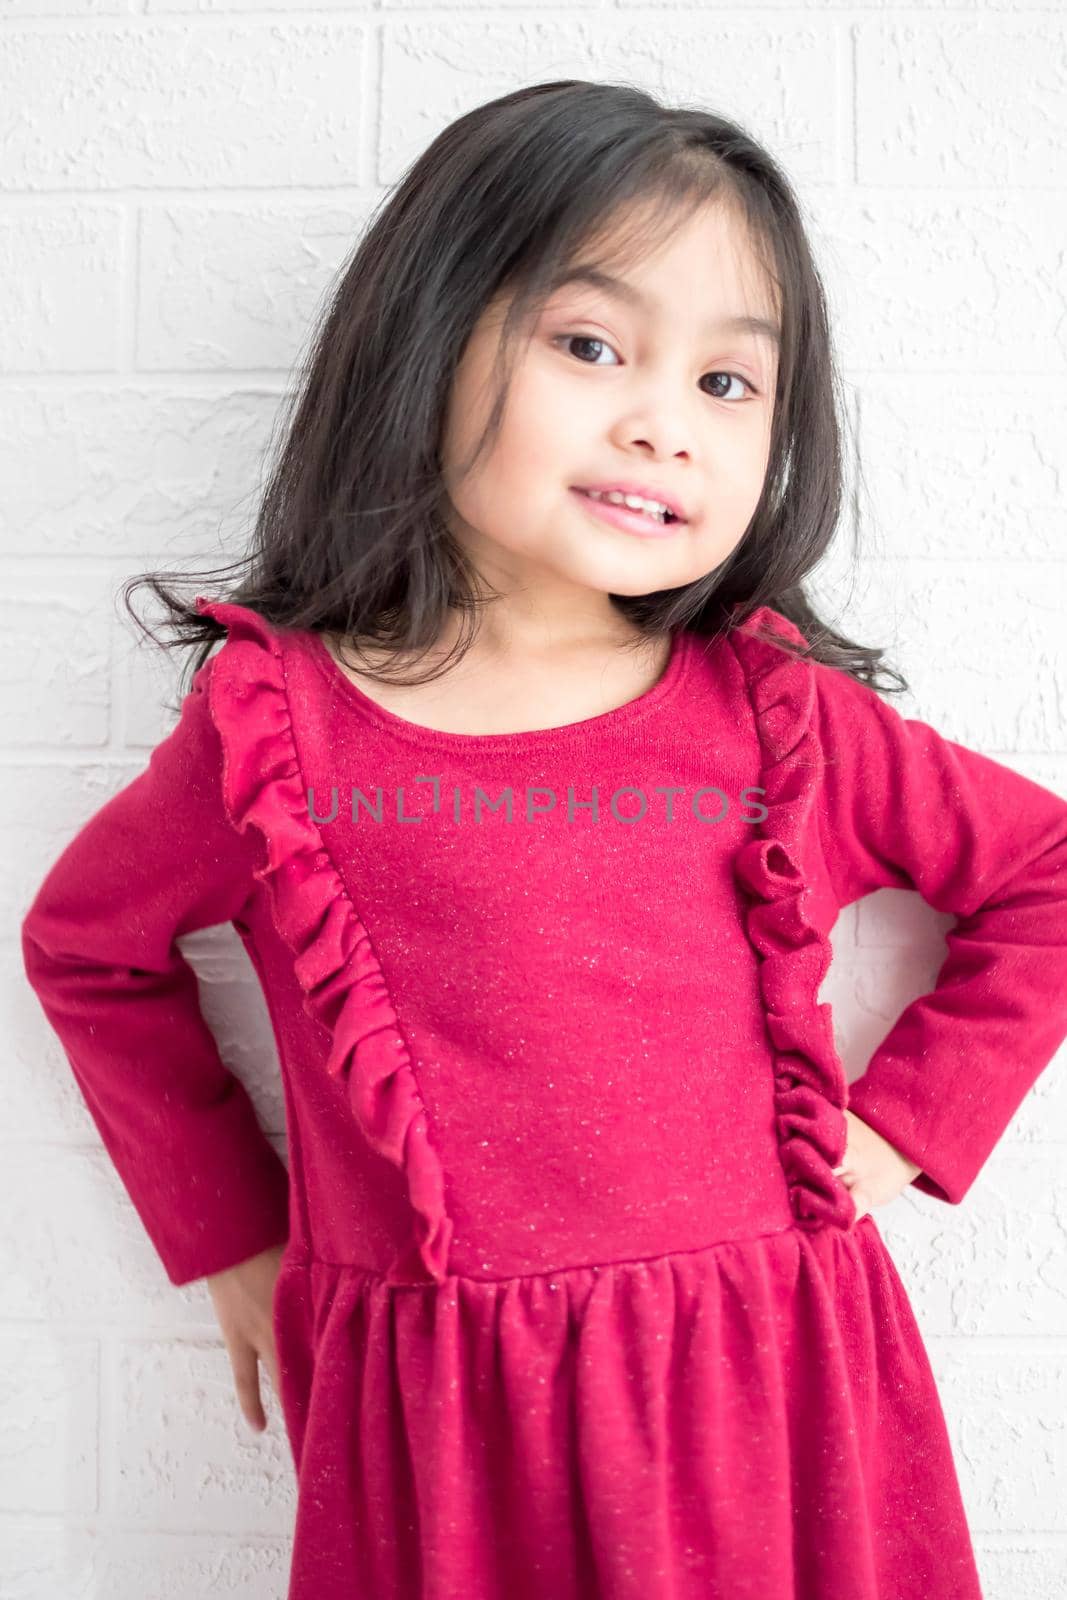 A Fashion model and beauty look. Stylish girl with pretty face on grey background. Hairdresser, skincare, casual style. Beauty and kid fashion with healthy hair. Little girl with long hair.